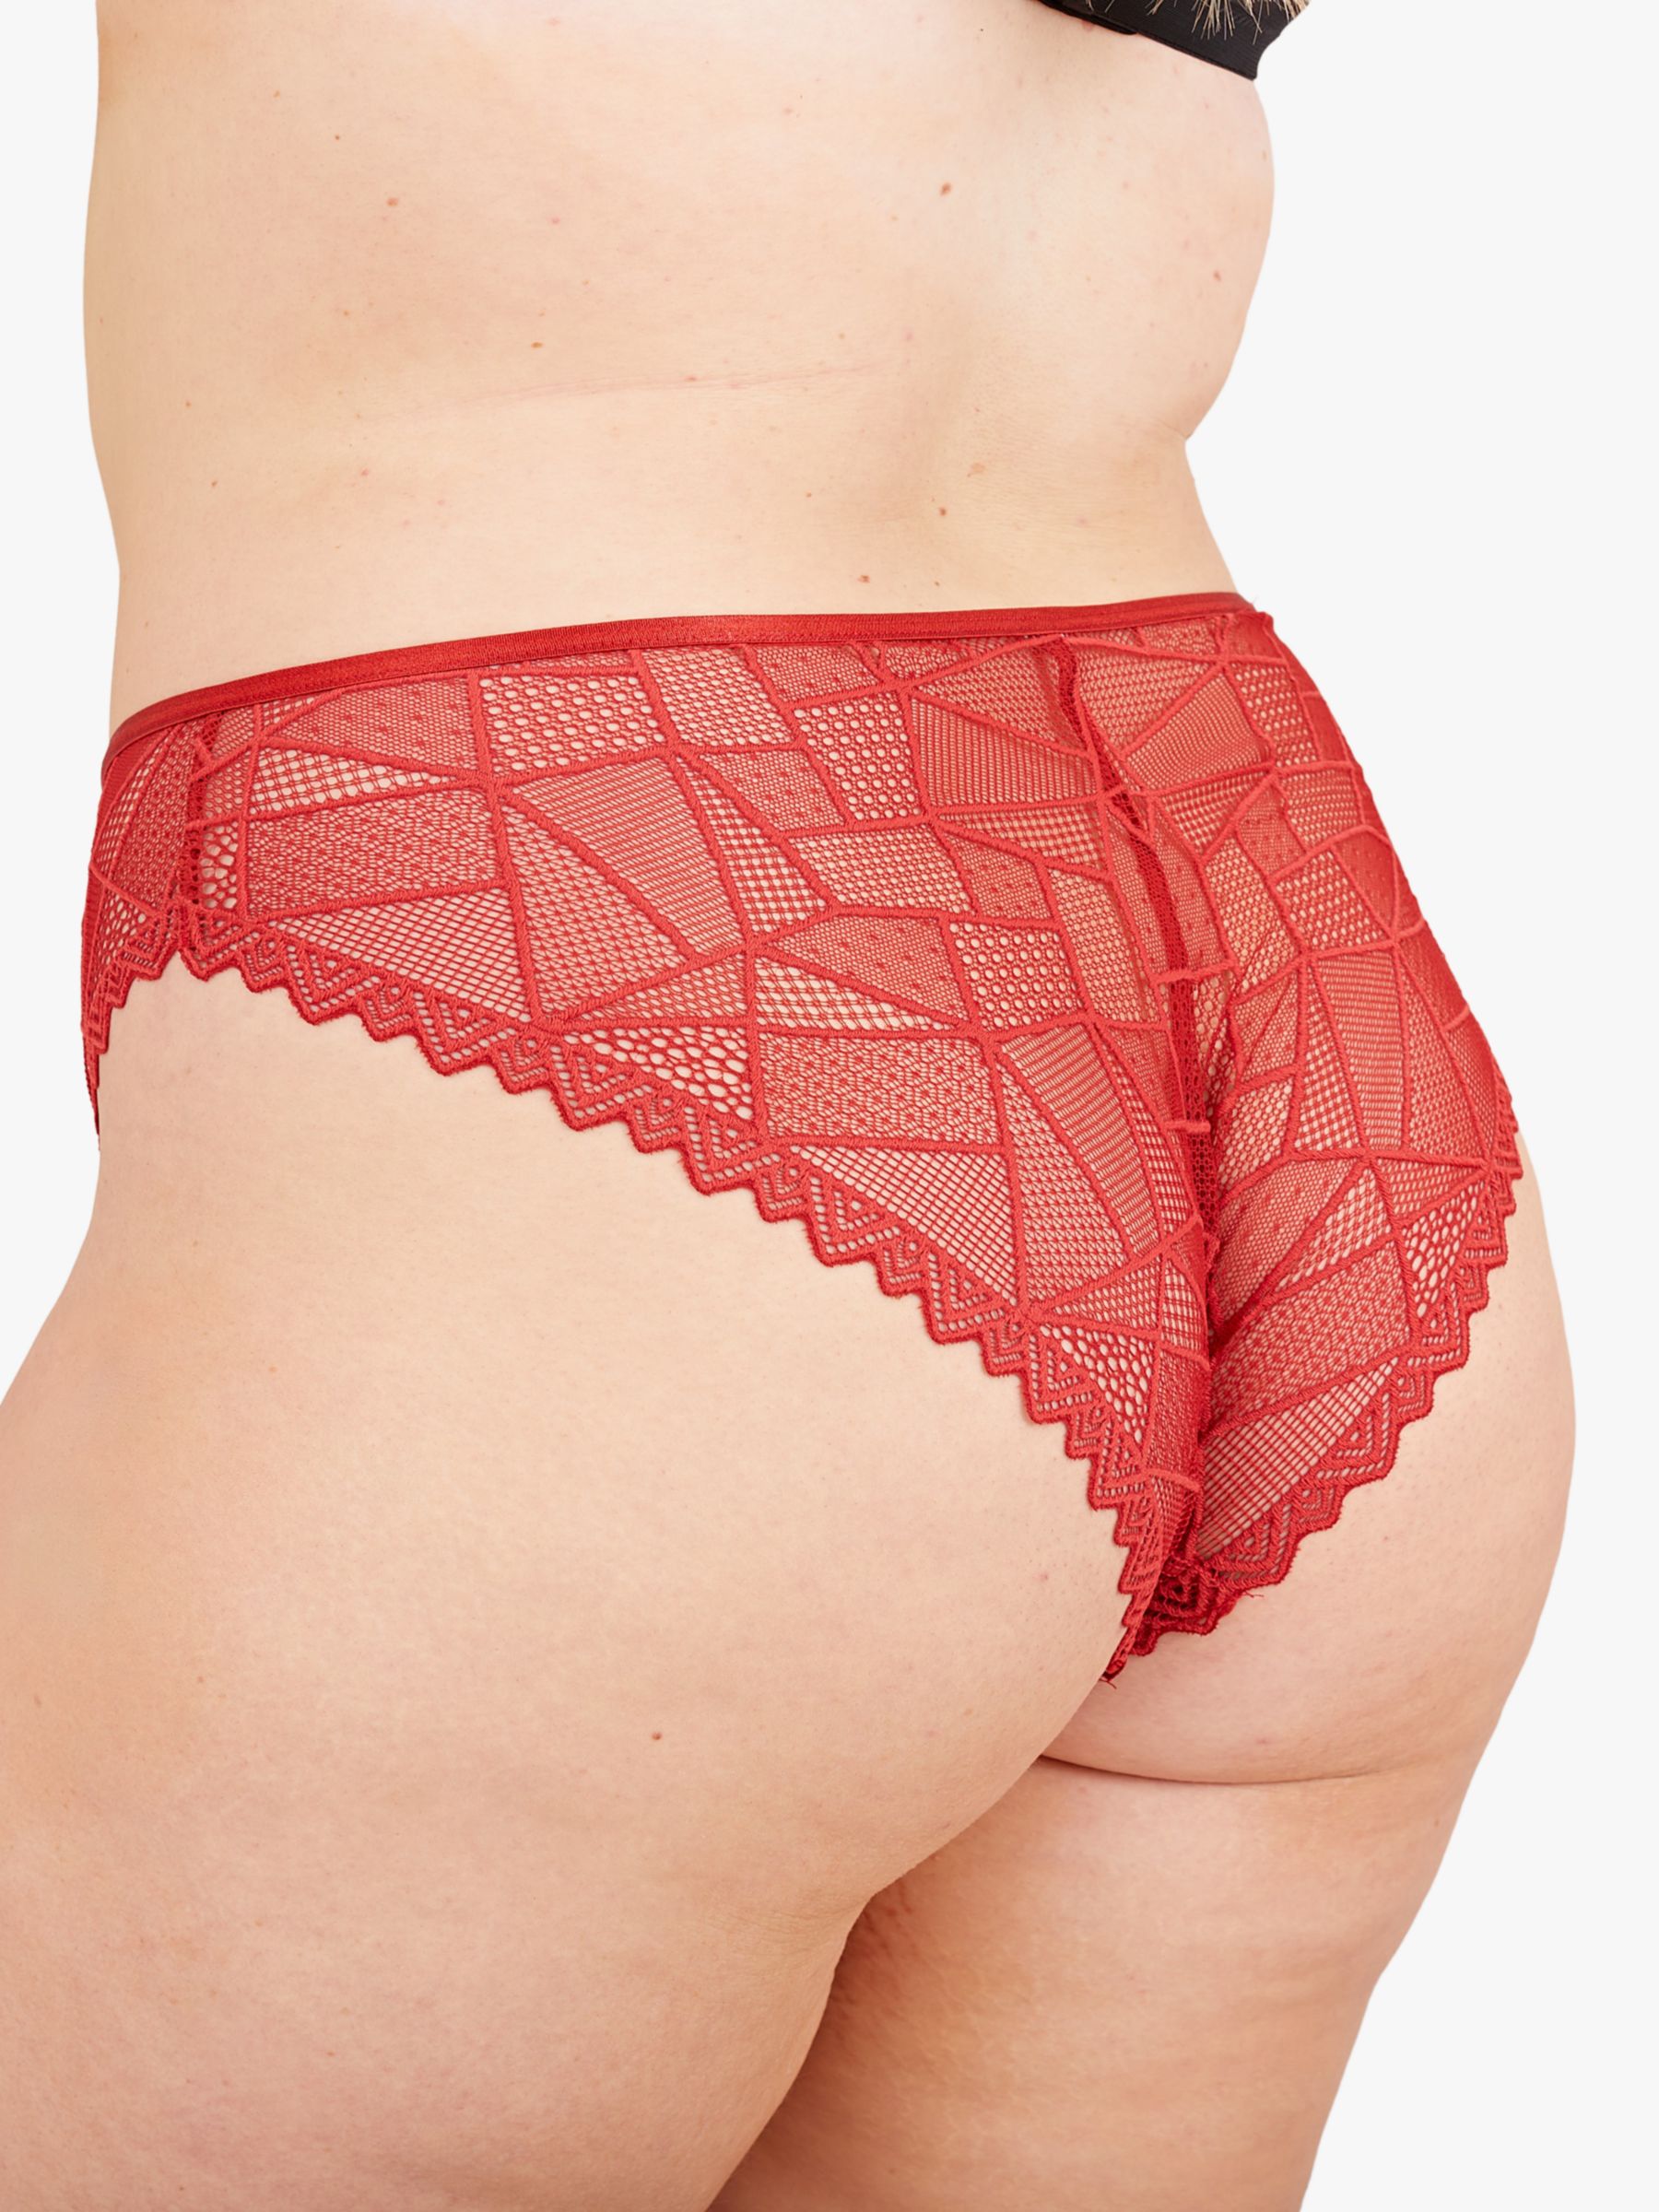 Oola Lingerie Geometric Lace Knickers, Red, 14-16